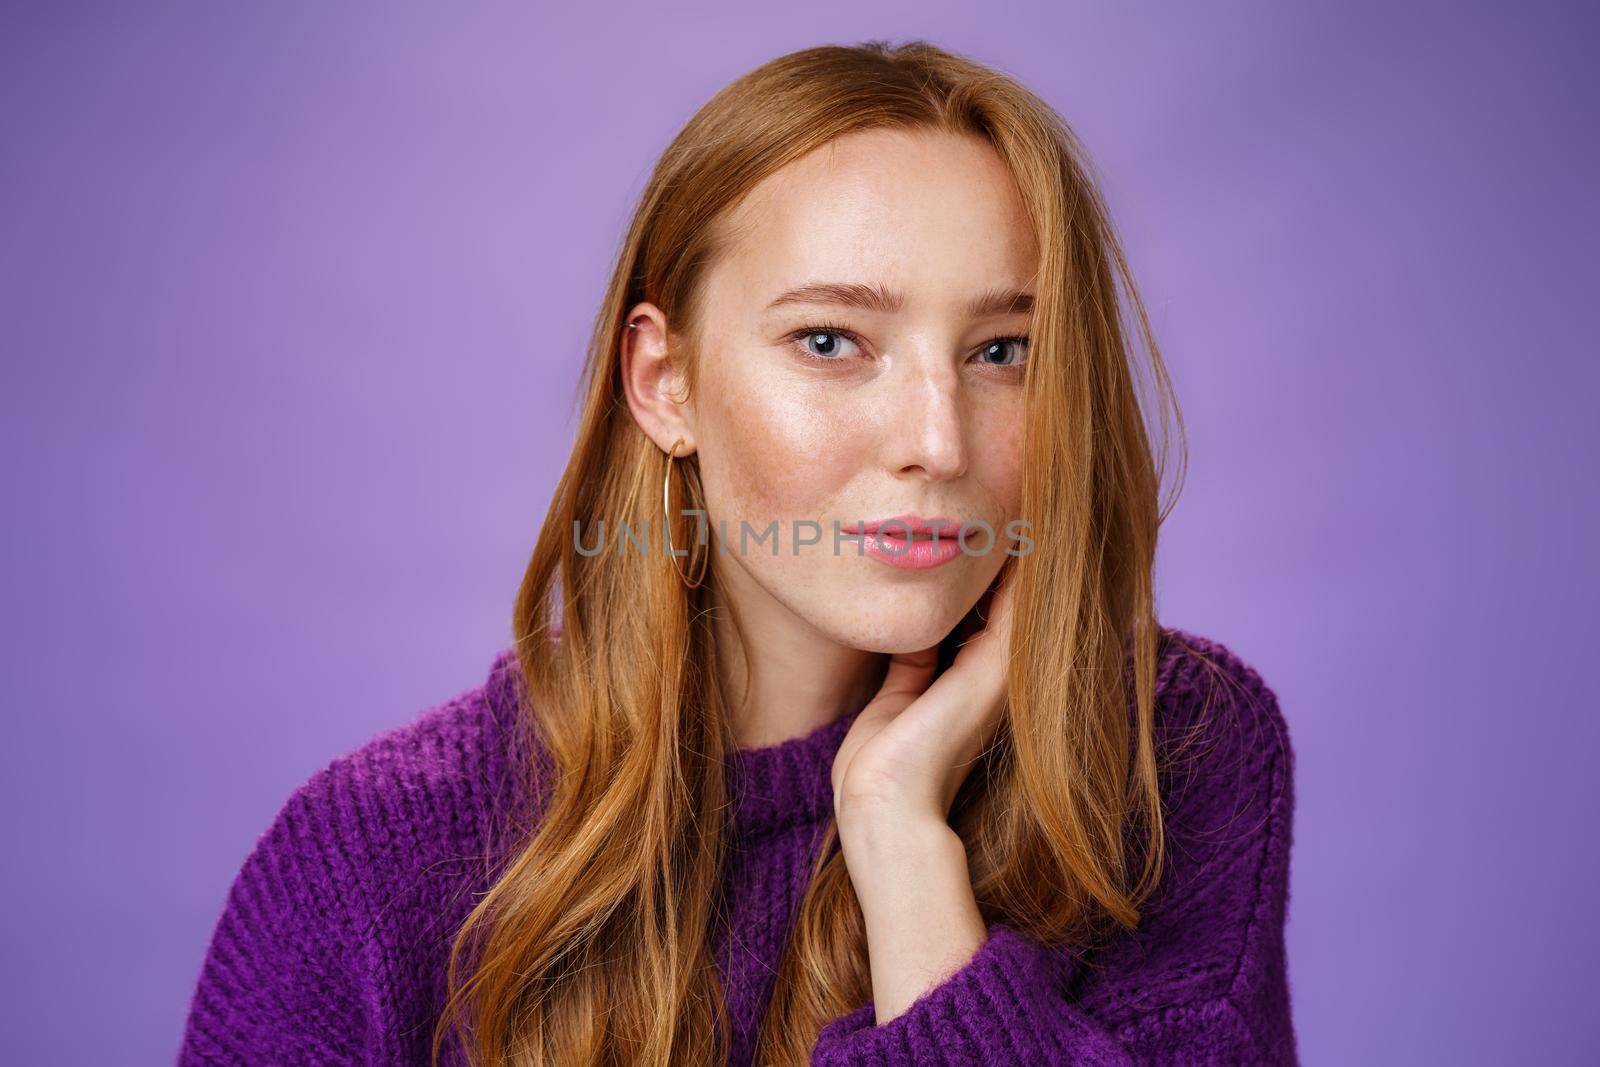 Sensual and romantic woman with red hair and freckles touching cheek gently as curls dropping on half face gazing charmed and flirty at camera, smiling being tender and coquettish over purple wall.